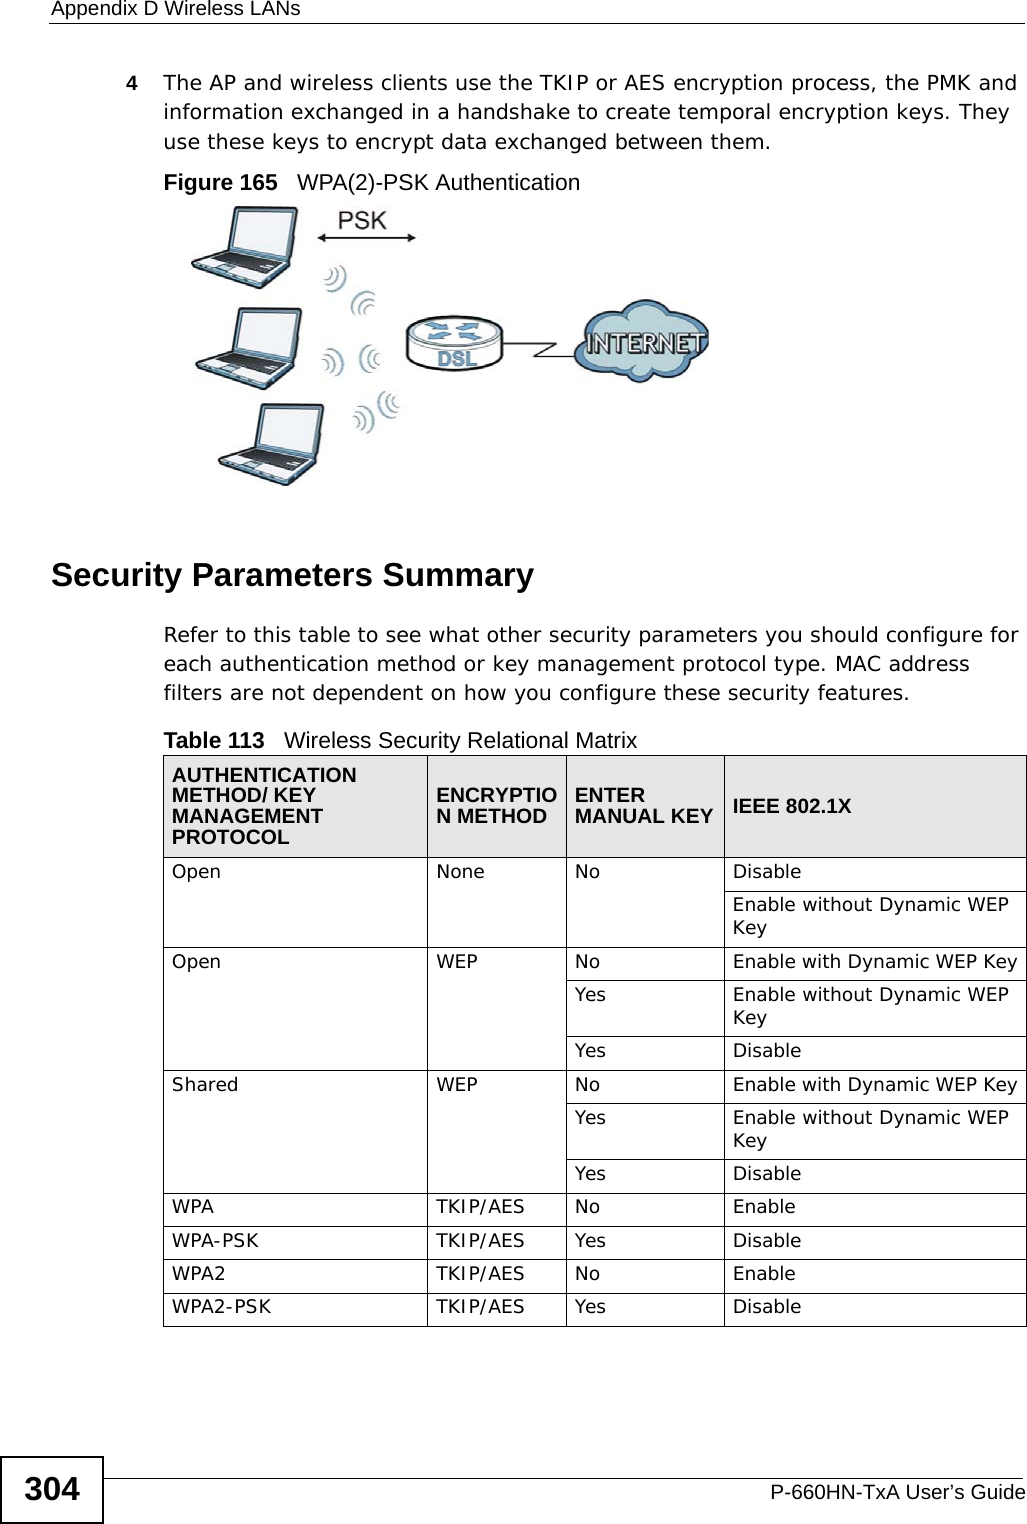 Appendix D Wireless LANsP-660HN-TxA User’s Guide3044The AP and wireless clients use the TKIP or AES encryption process, the PMK and information exchanged in a handshake to create temporal encryption keys. They use these keys to encrypt data exchanged between them.Figure 165   WPA(2)-PSK AuthenticationSecurity Parameters SummaryRefer to this table to see what other security parameters you should configure for each authentication method or key management protocol type. MAC address filters are not dependent on how you configure these security features.Table 113   Wireless Security Relational MatrixAUTHENTICATION METHOD/ KEY MANAGEMENT PROTOCOLENCRYPTION METHOD ENTER MANUAL KEY IEEE 802.1XOpen None No DisableEnable without Dynamic WEP KeyOpen WEP No           Enable with Dynamic WEP KeyYes Enable without Dynamic WEP KeyYes DisableShared WEP  No           Enable with Dynamic WEP KeyYes Enable without Dynamic WEP KeyYes DisableWPA  TKIP/AES No EnableWPA-PSK  TKIP/AES Yes DisableWPA2 TKIP/AES No EnableWPA2-PSK  TKIP/AES Yes Disable